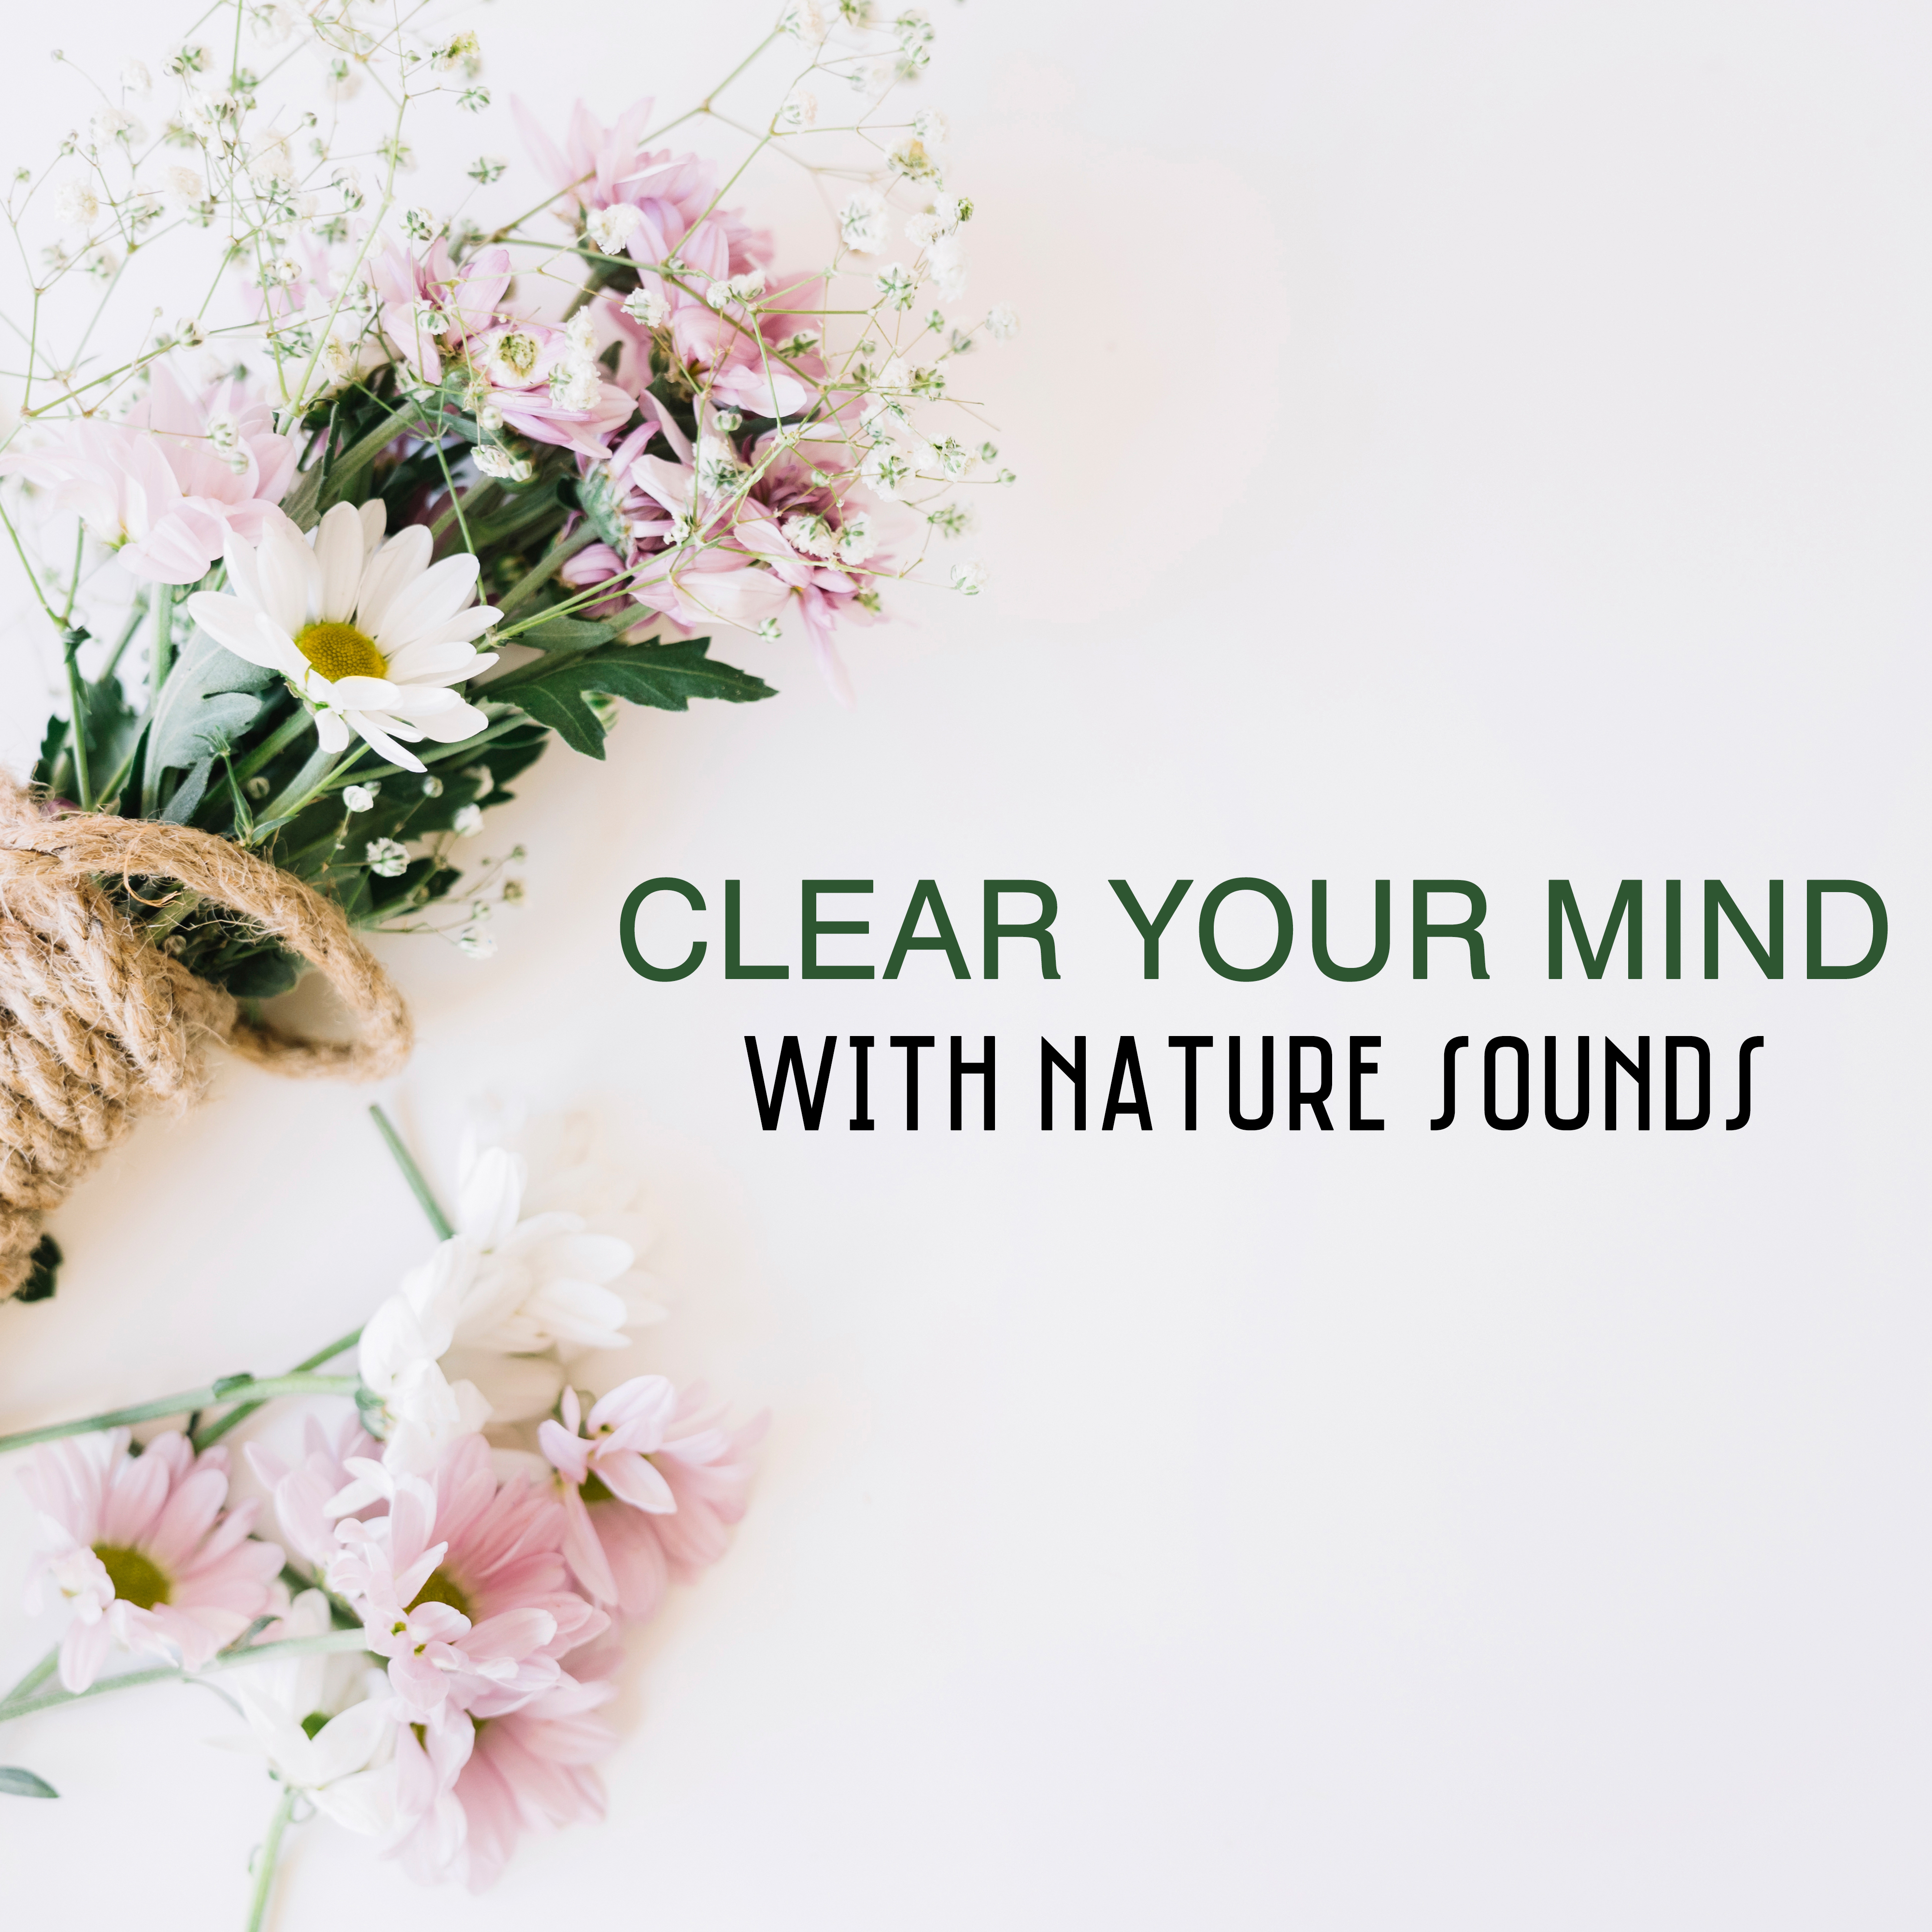 Clear Your Mind With Nature Sounds